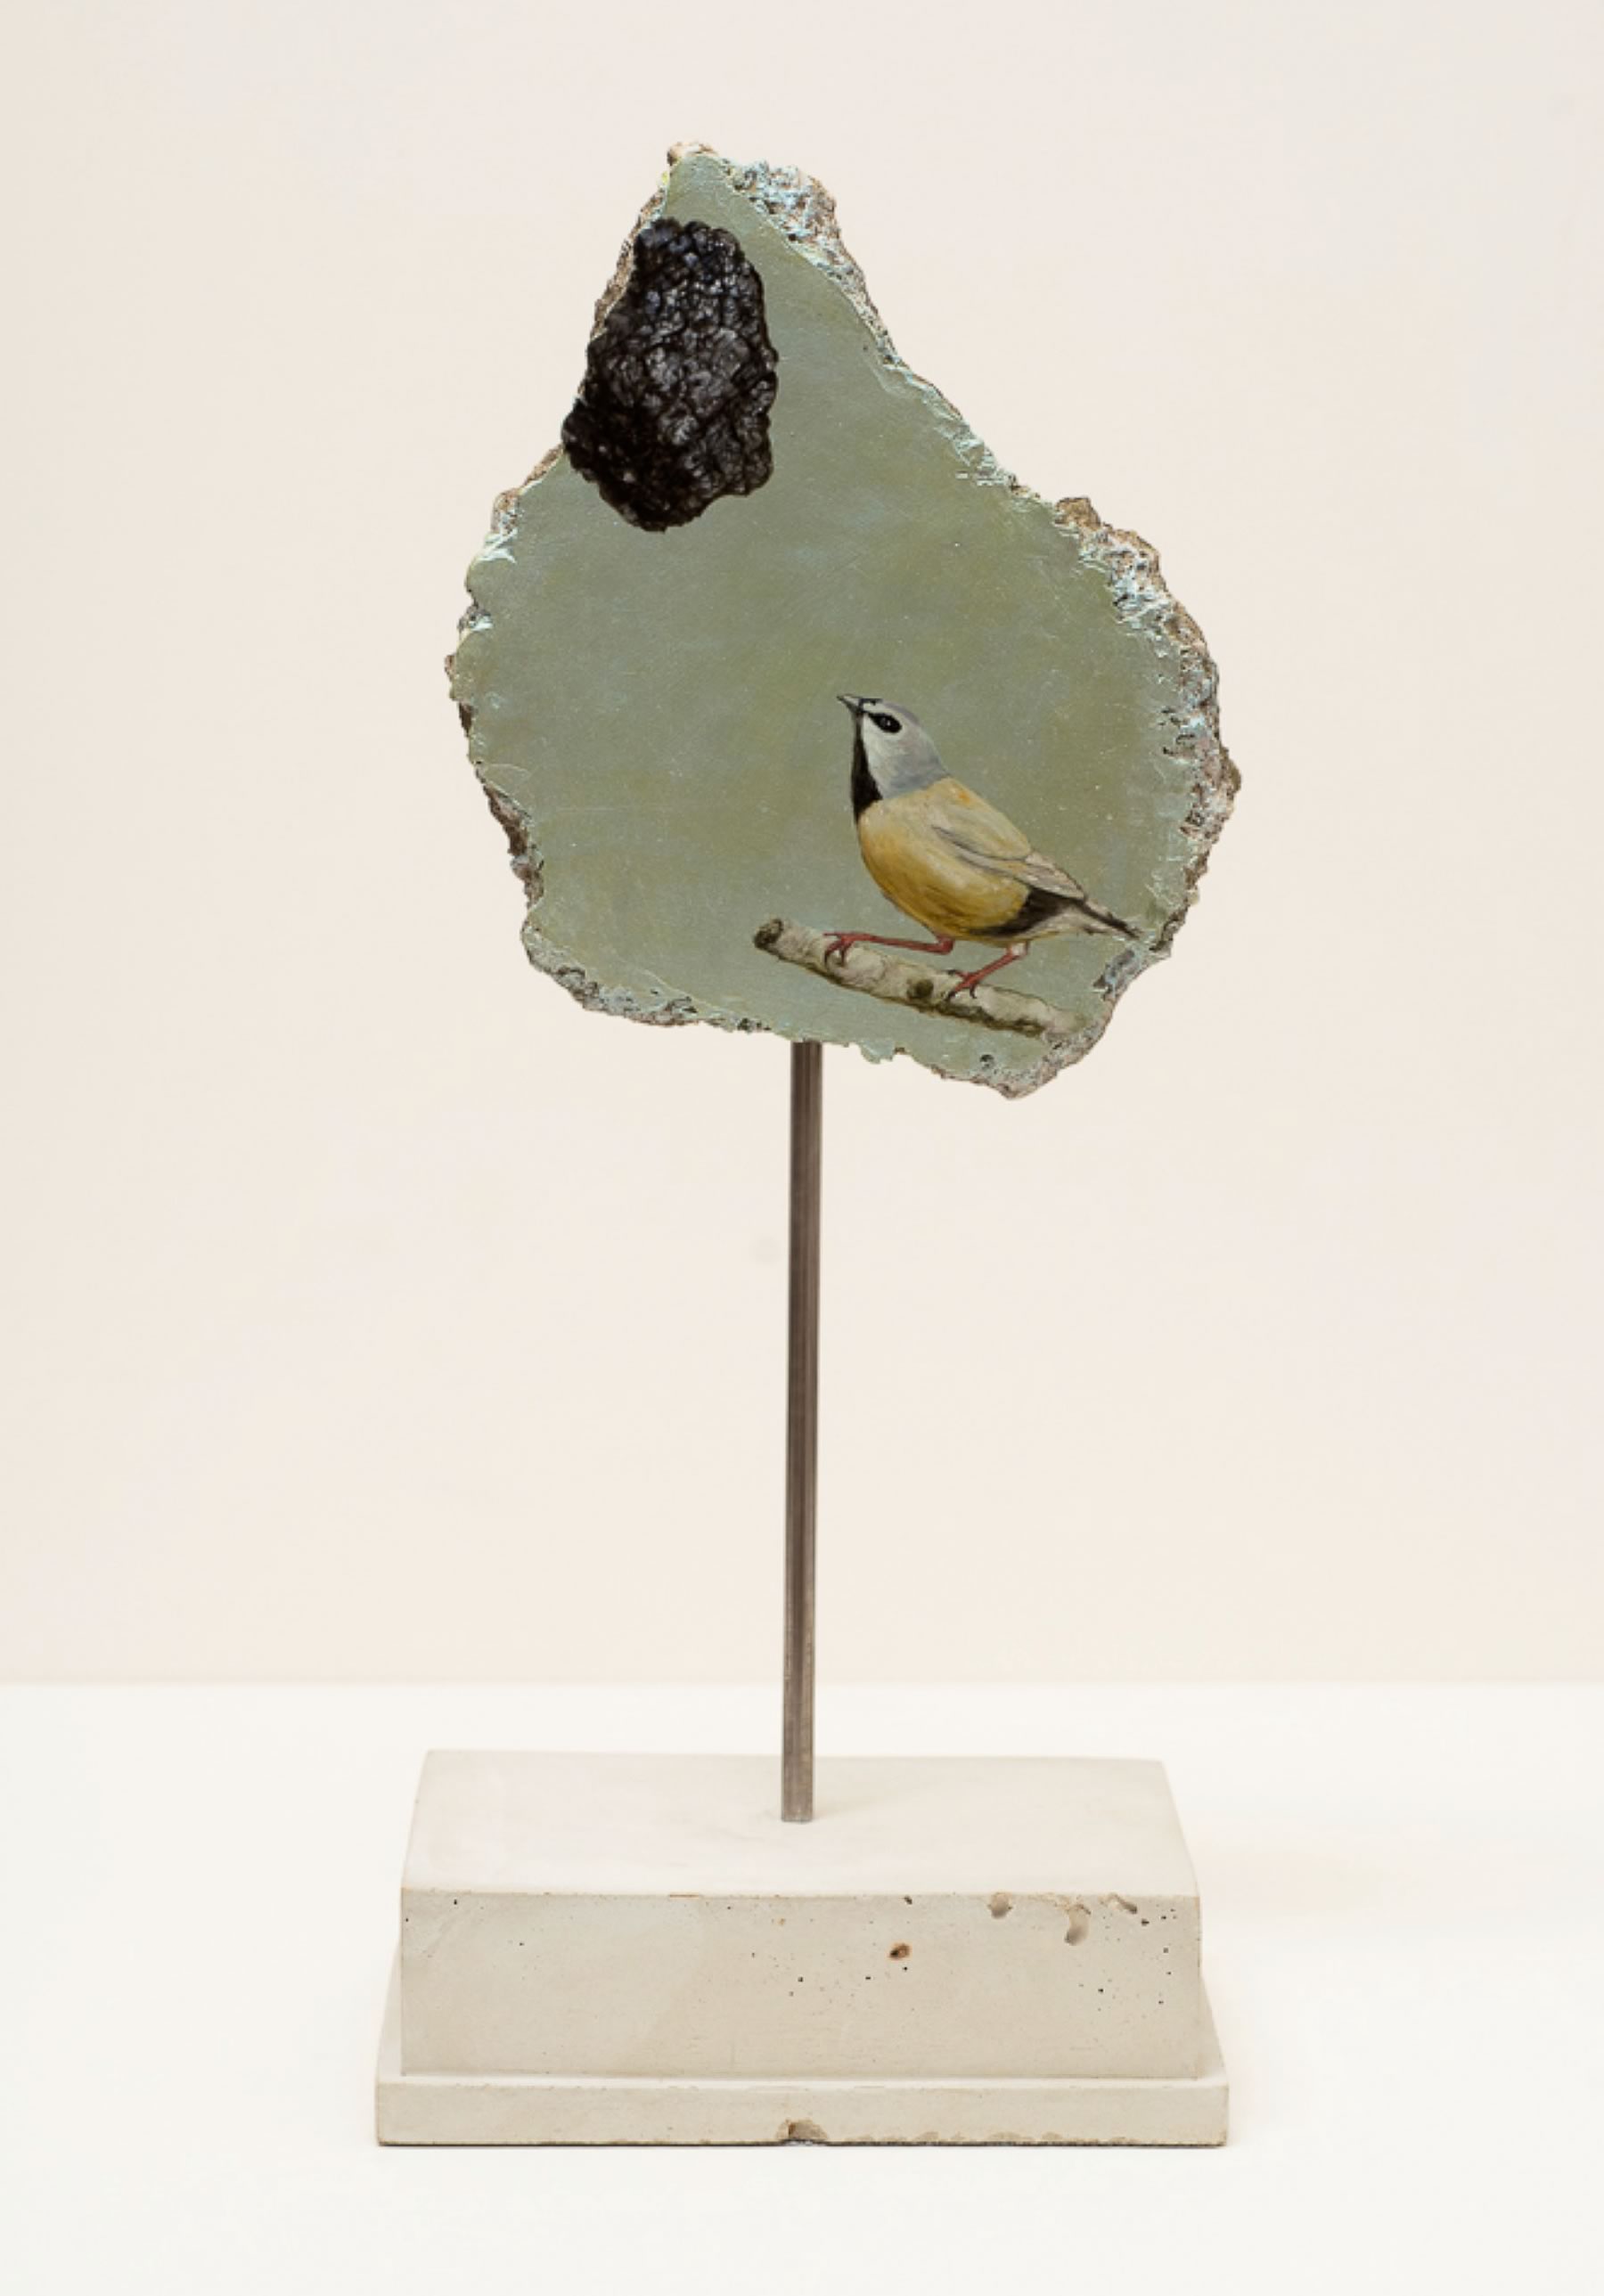 Sculpture by artist Helen Wright, titled The black throated Finch meets Adani (channelling my inner Goya) (2019) made from a piece of concrete fixed to a plinth with a metal rod. The surface is painted with a blue iridescent paint and features a bird looking at a lump of coal.